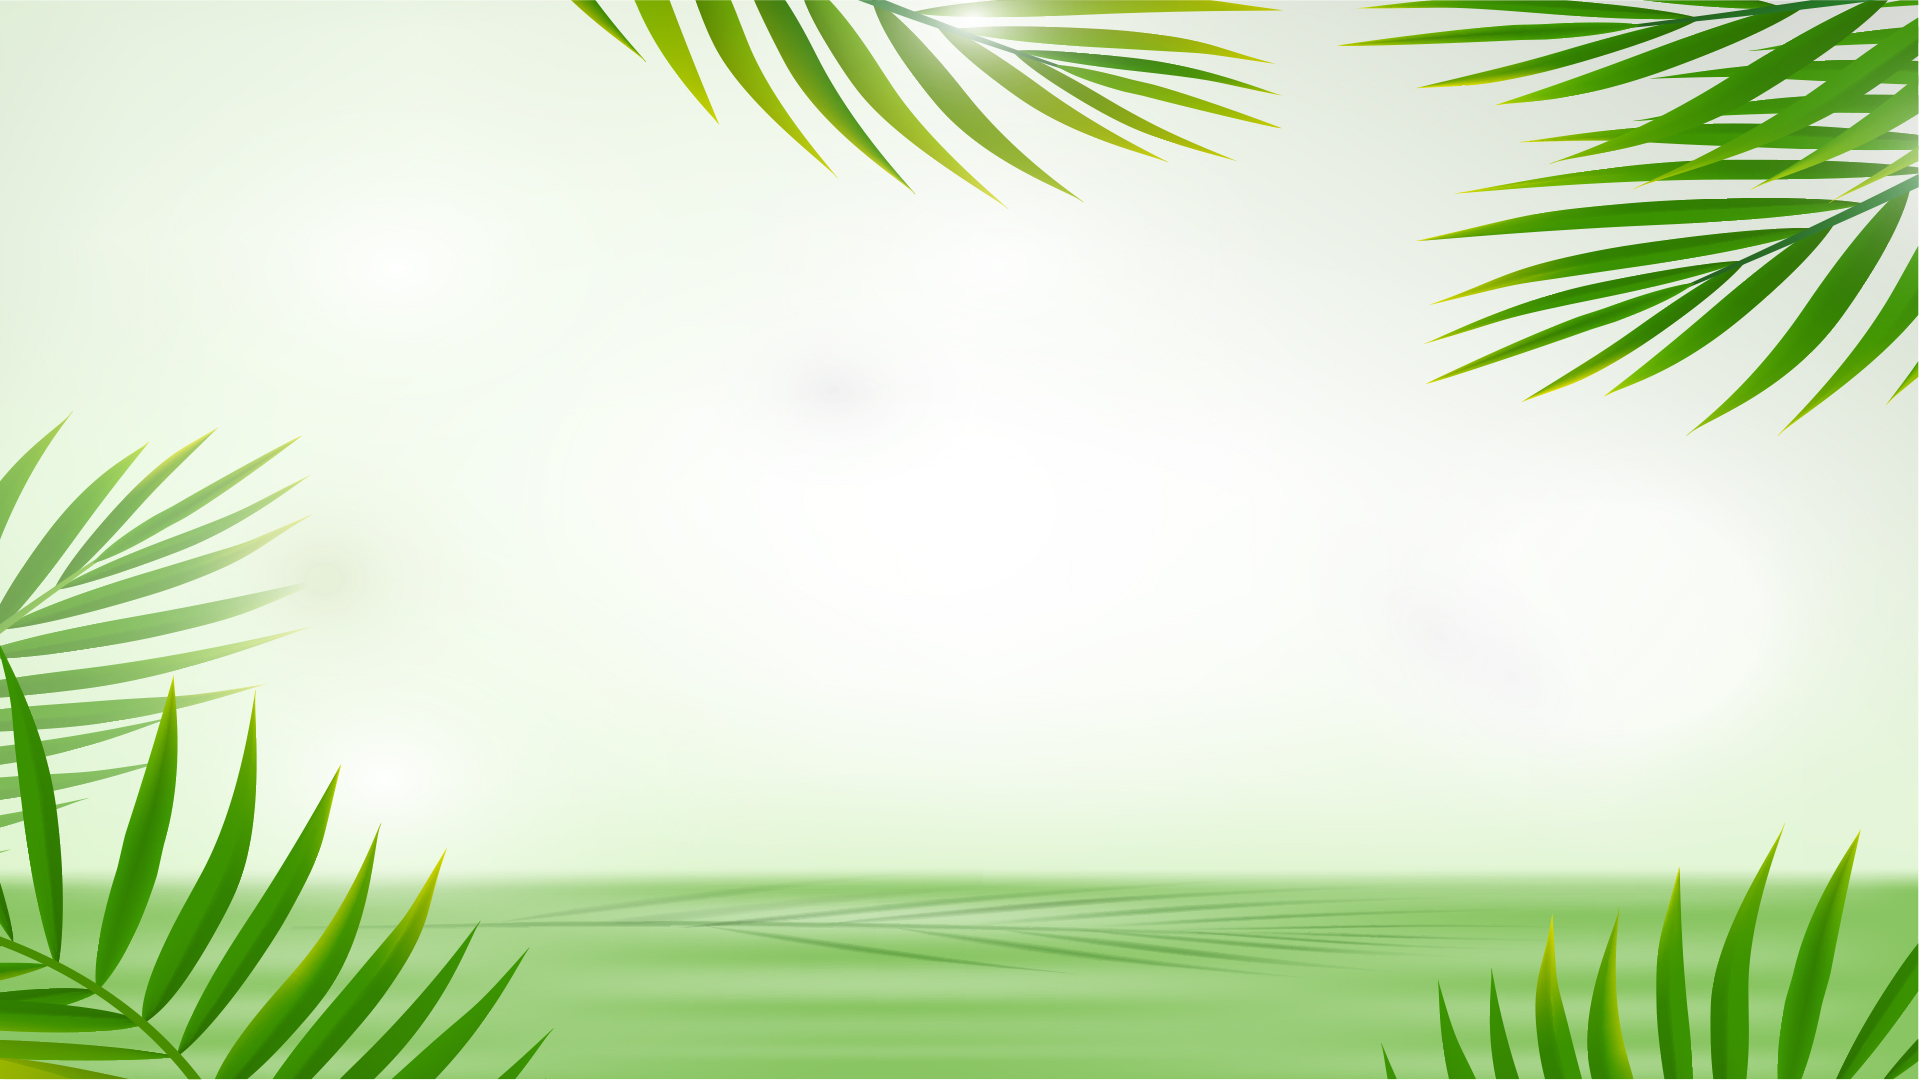 handle Rettsmedicin automatisk Sun Nature Template - Free PPT Backgrounds and Templates